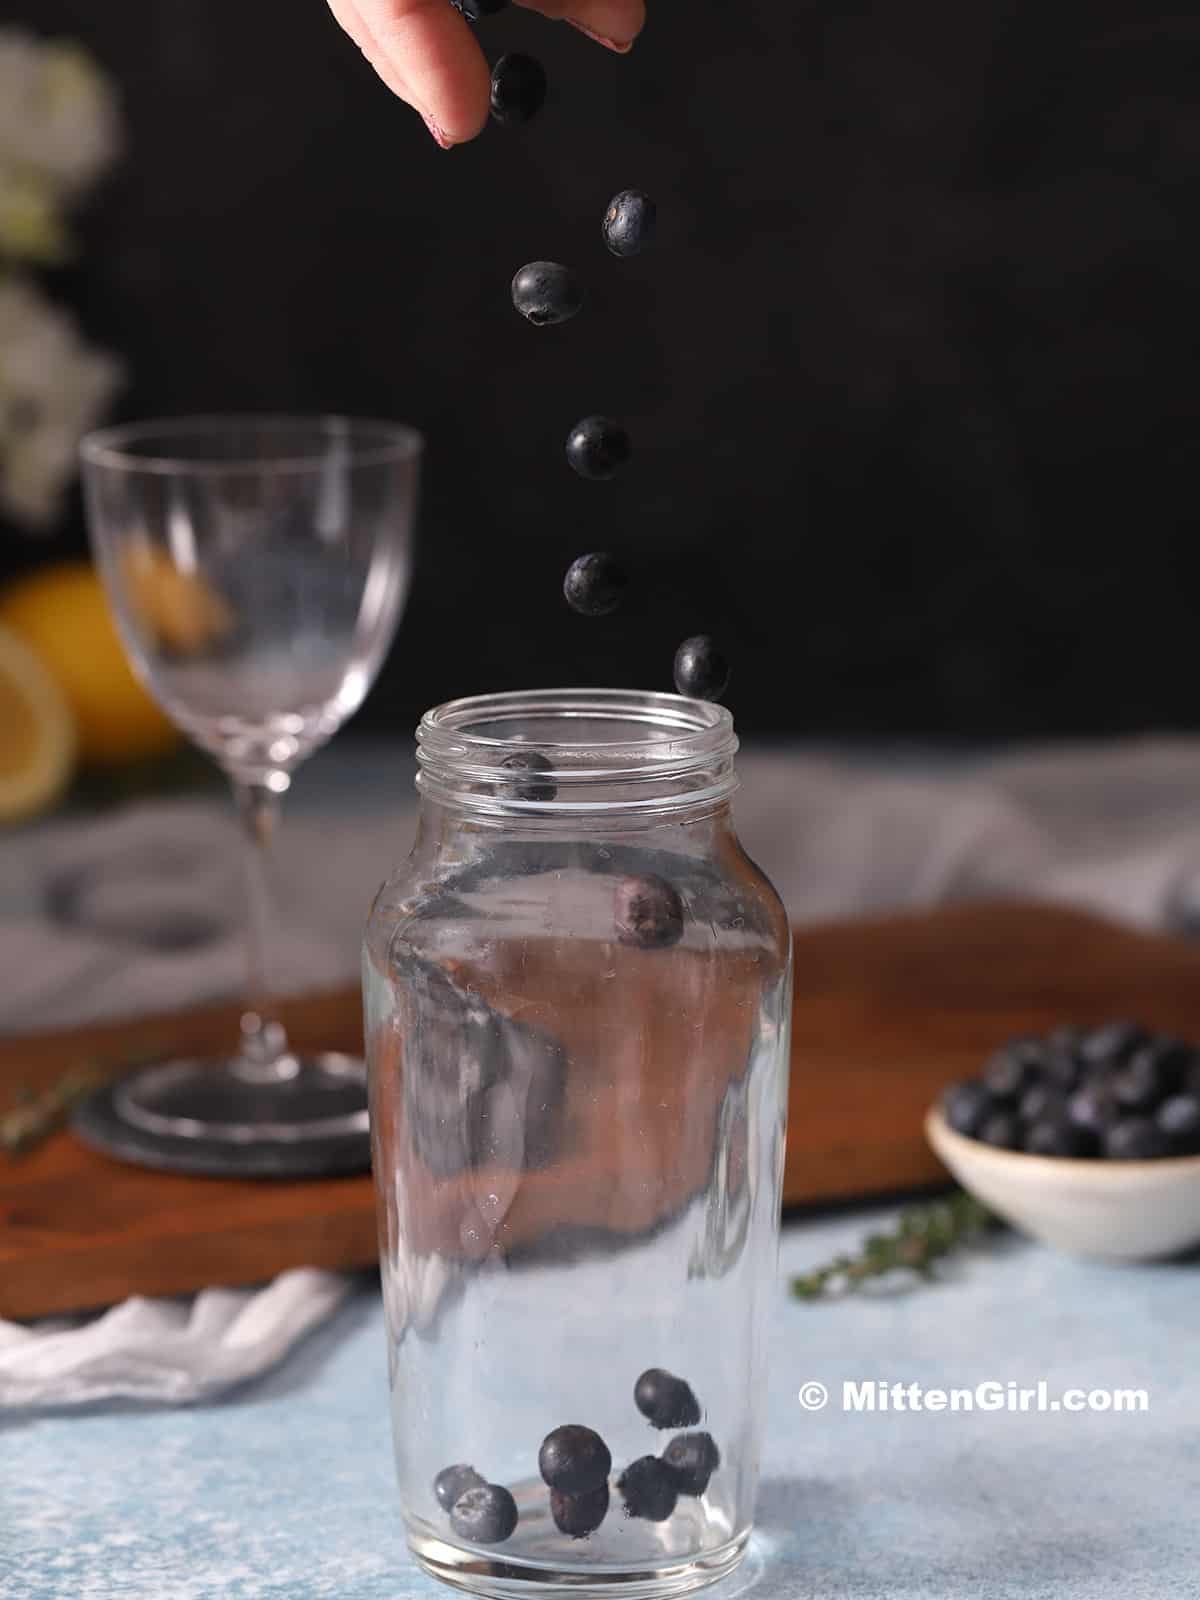 Blueberries dropping into a cocktail shaker.